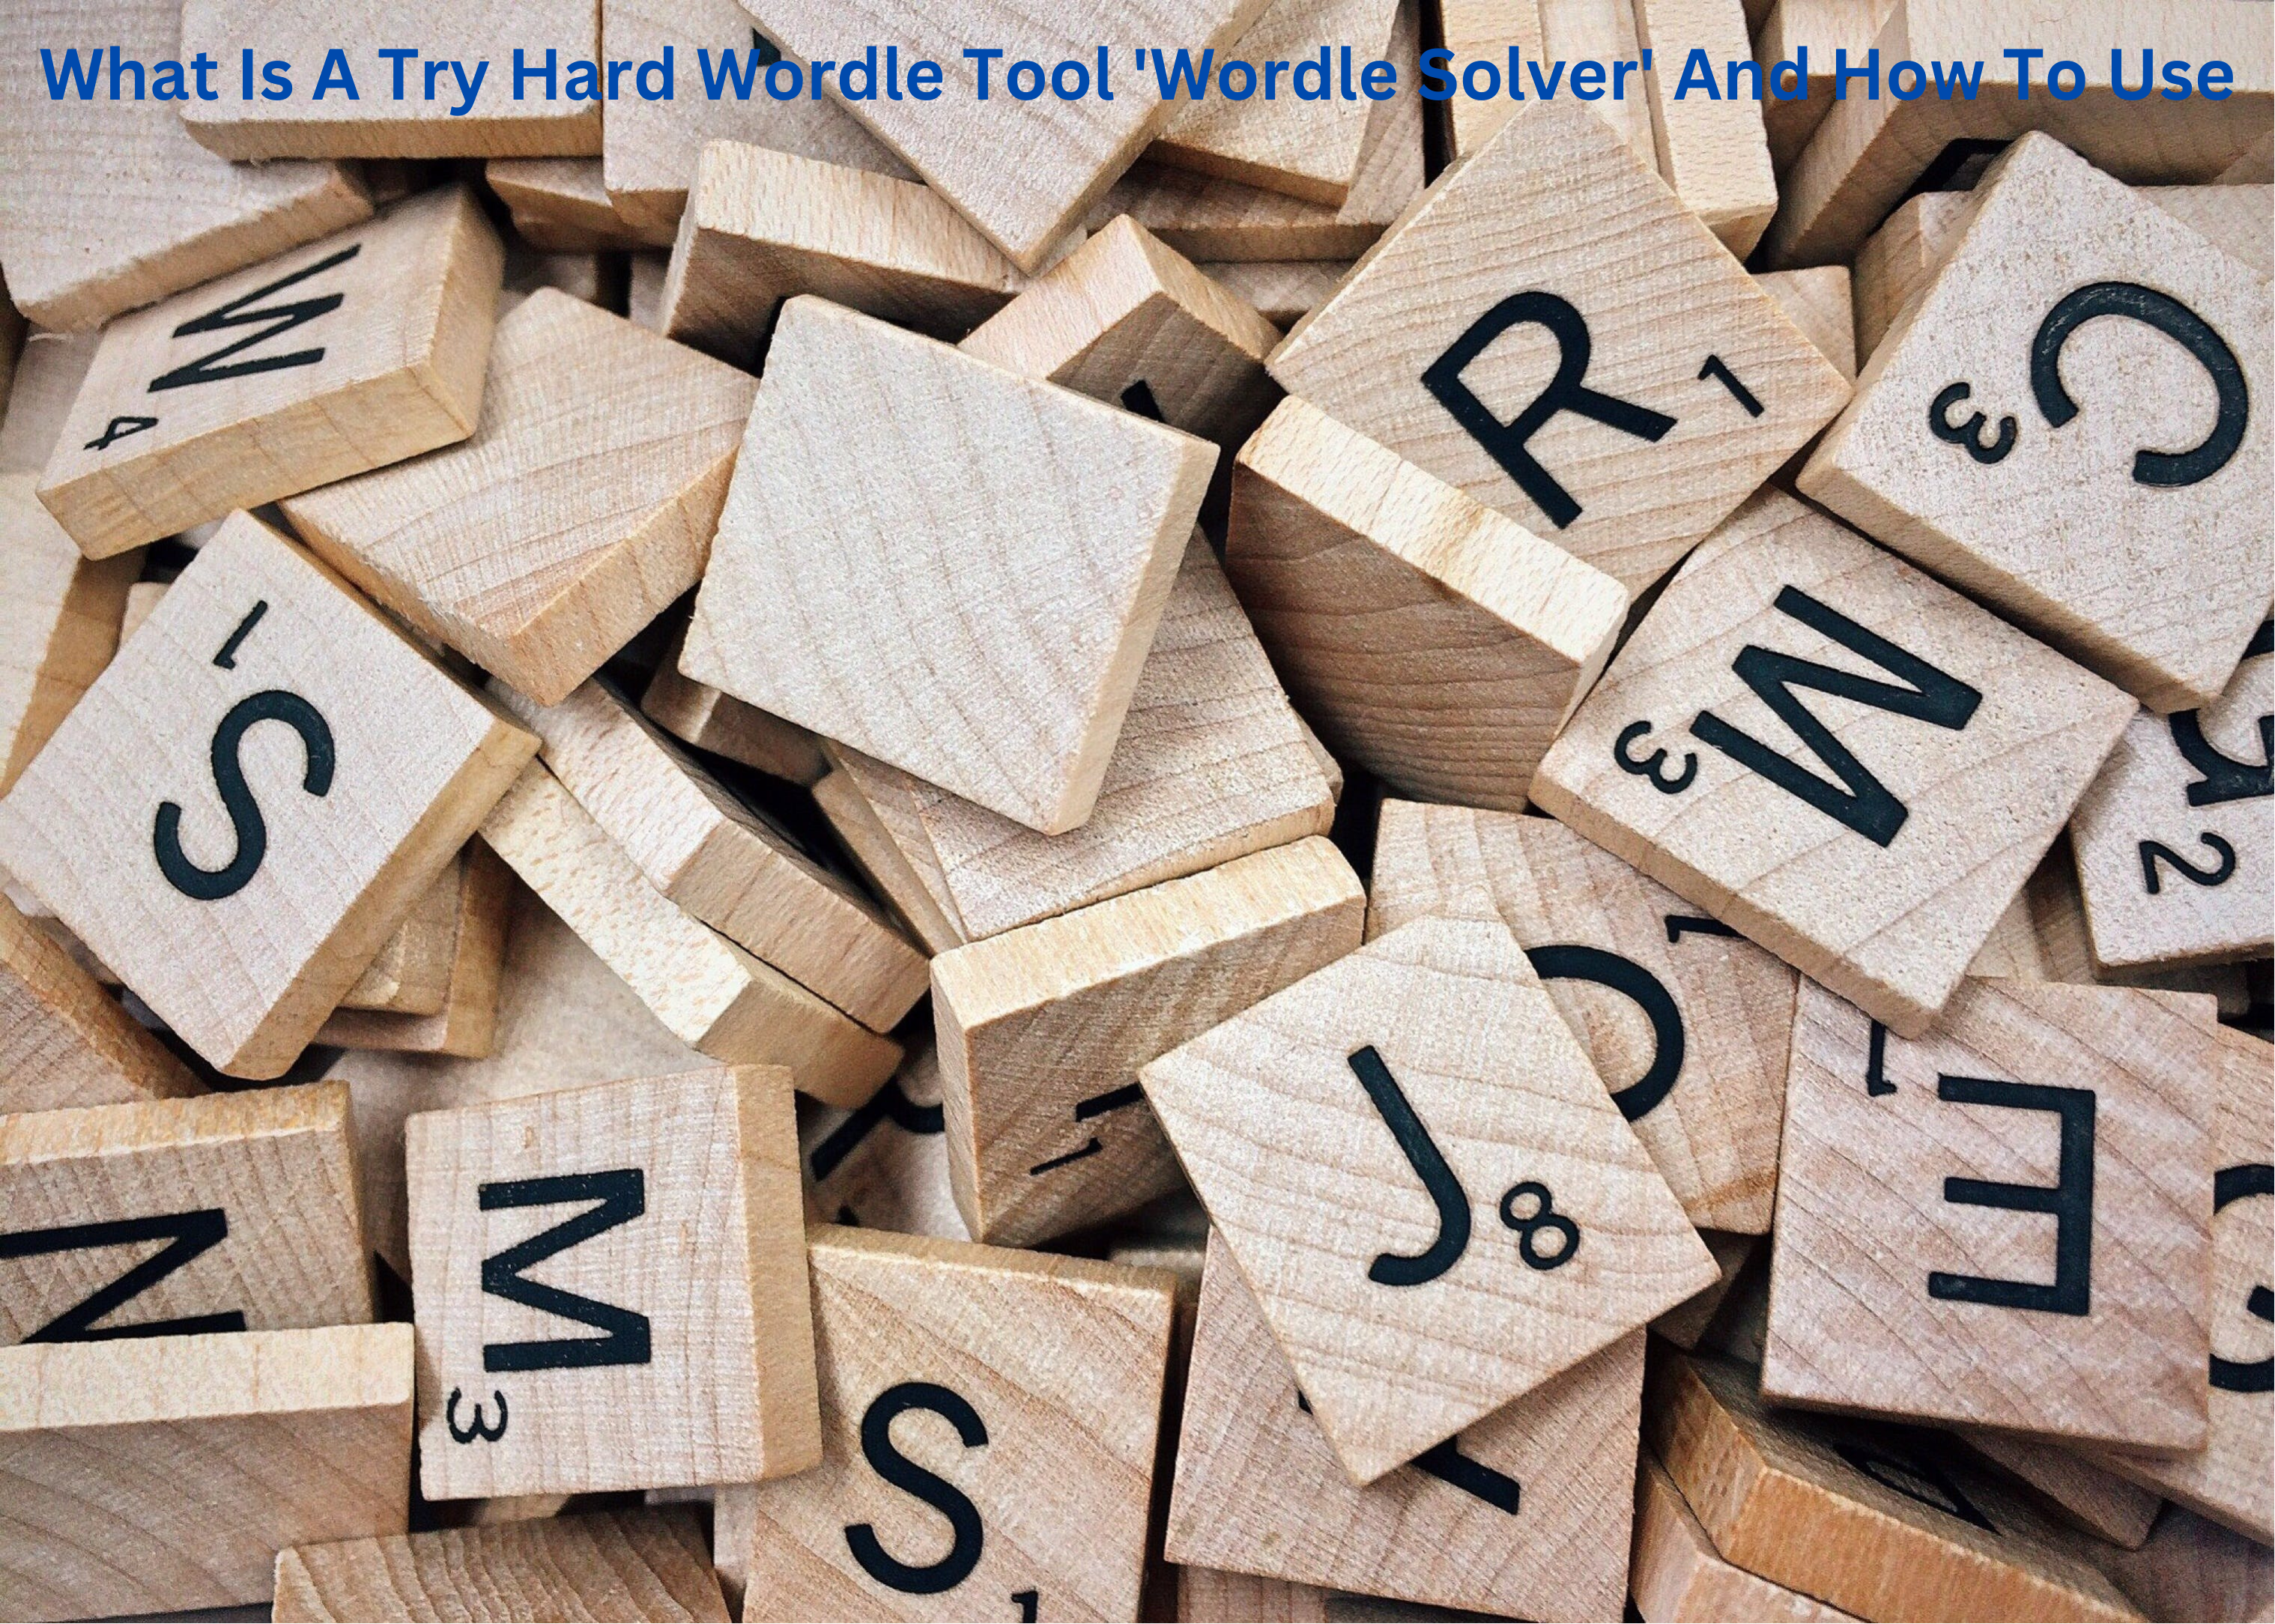 What Is A Try Hard Wordle Tool ‘Wordle Solver’ And How To Use